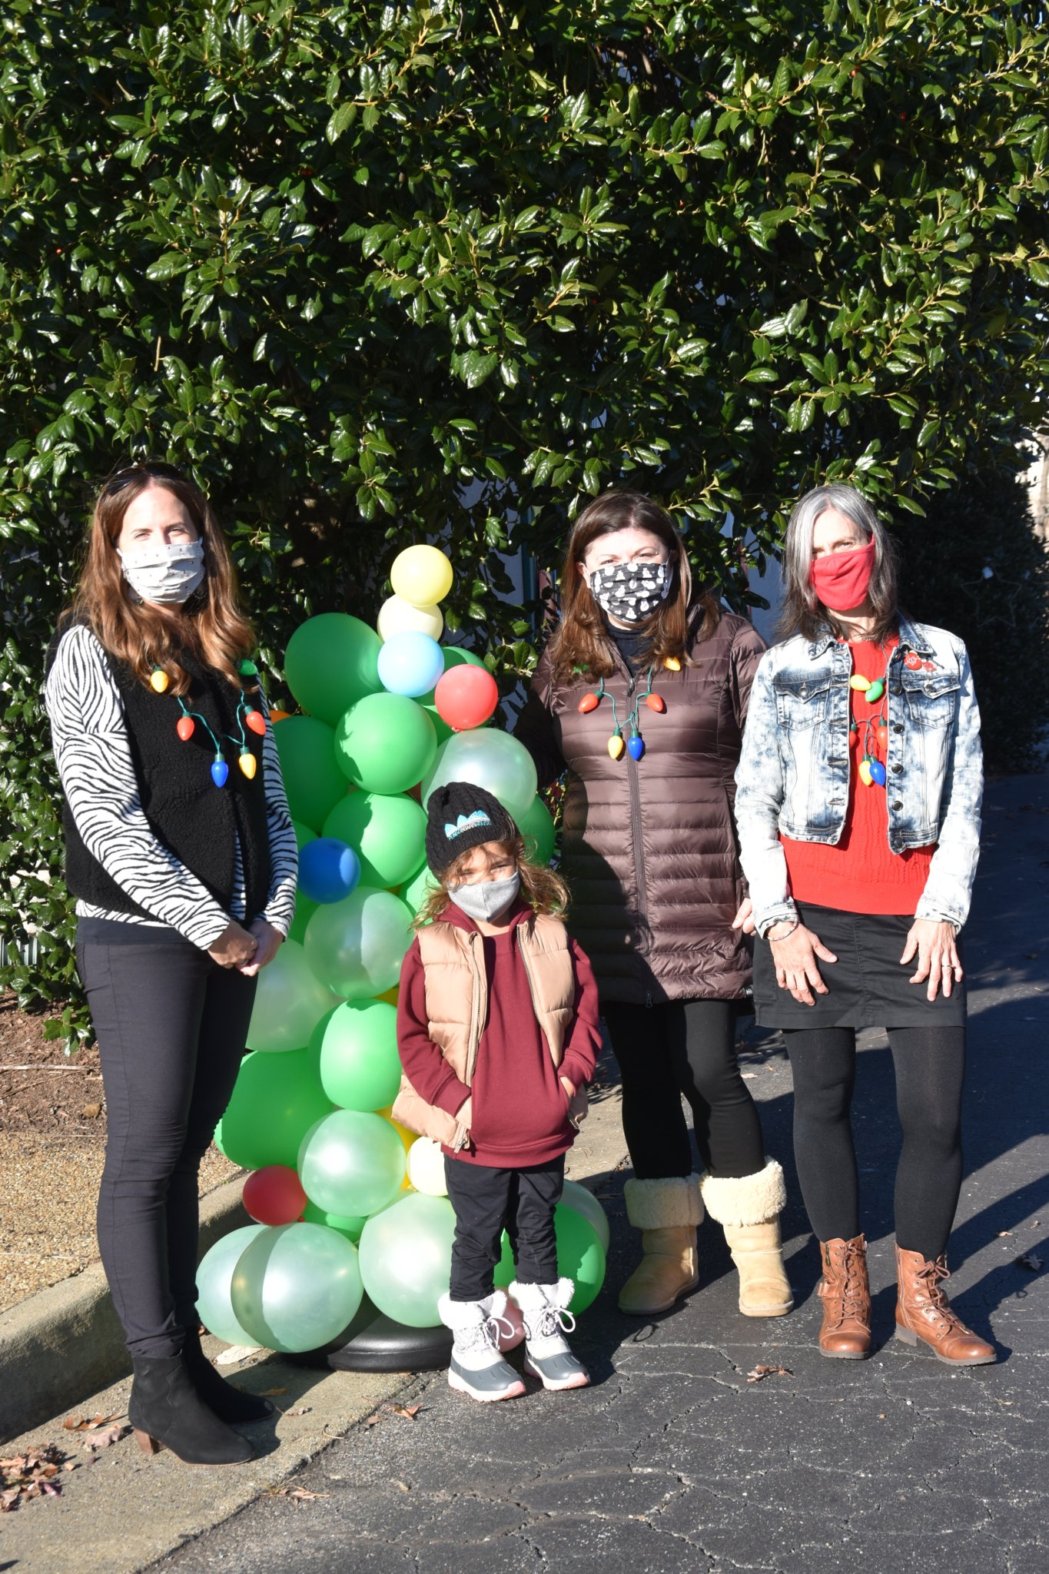 3 women and a child wearing masks standing outside beside a holiday tree made out of green and white balloons